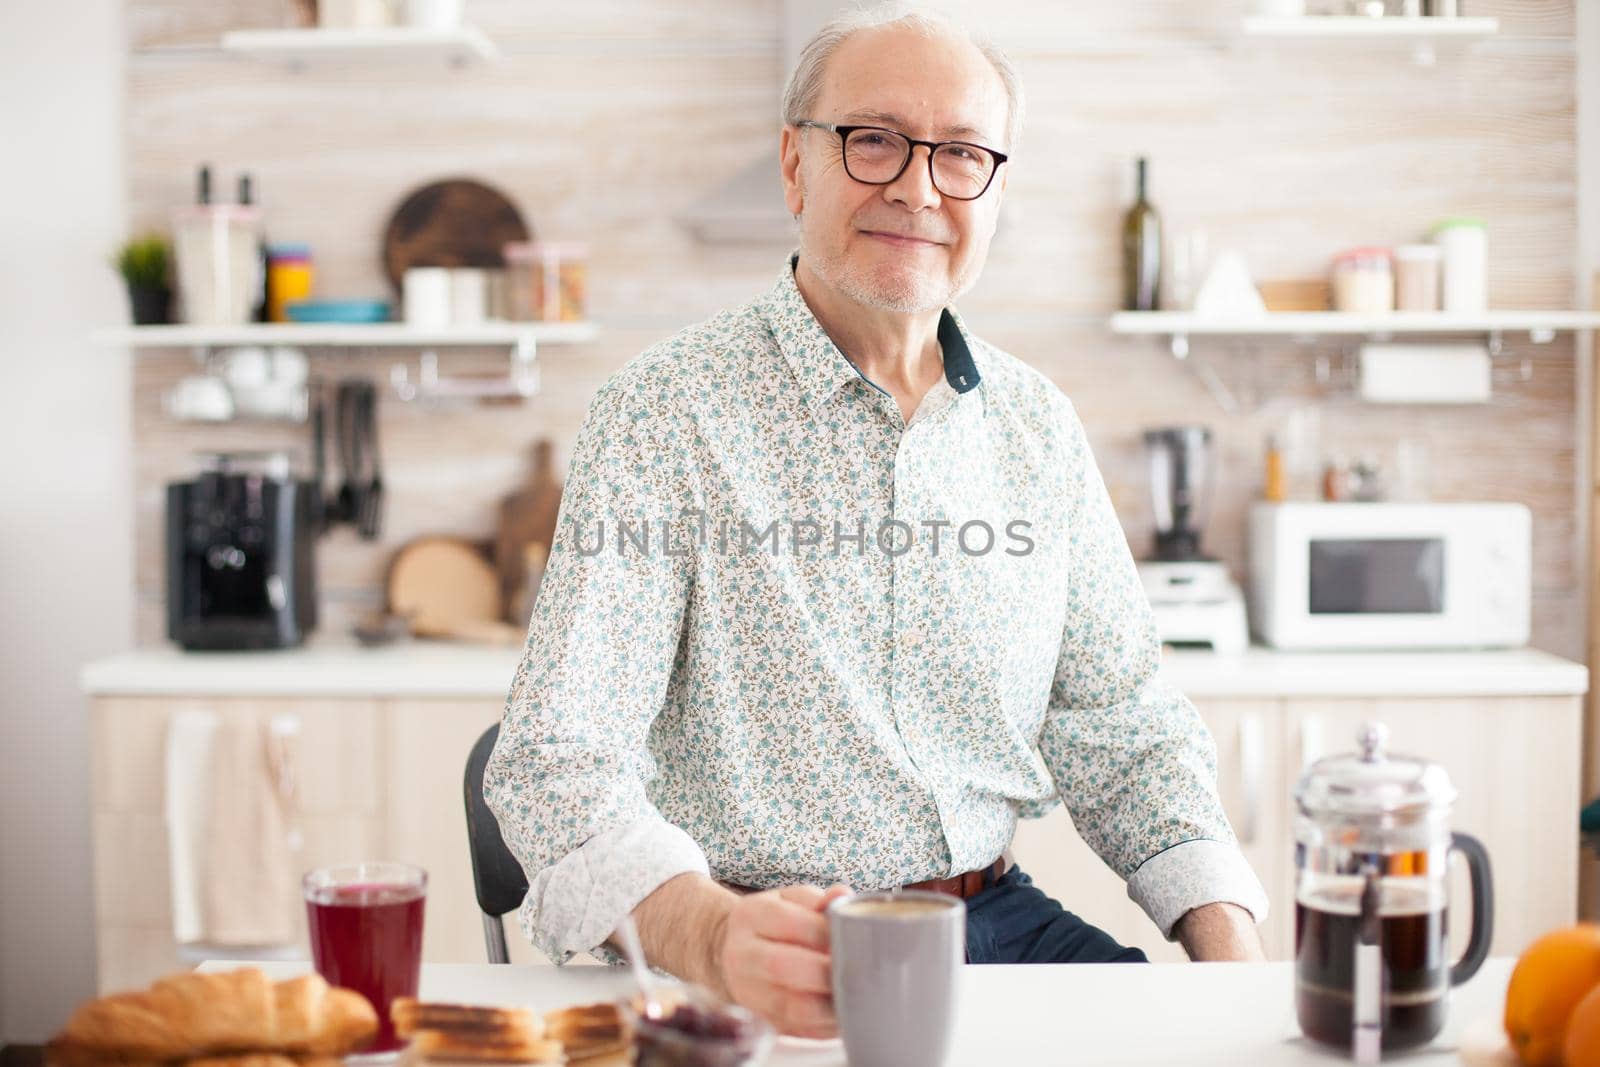 Senior man in kitchen smiling looking at camera holding hot coffee cup. Portrait of relaxed elderly older person in the morning, enjoying fresh warm drink. Healthy smiling adult face